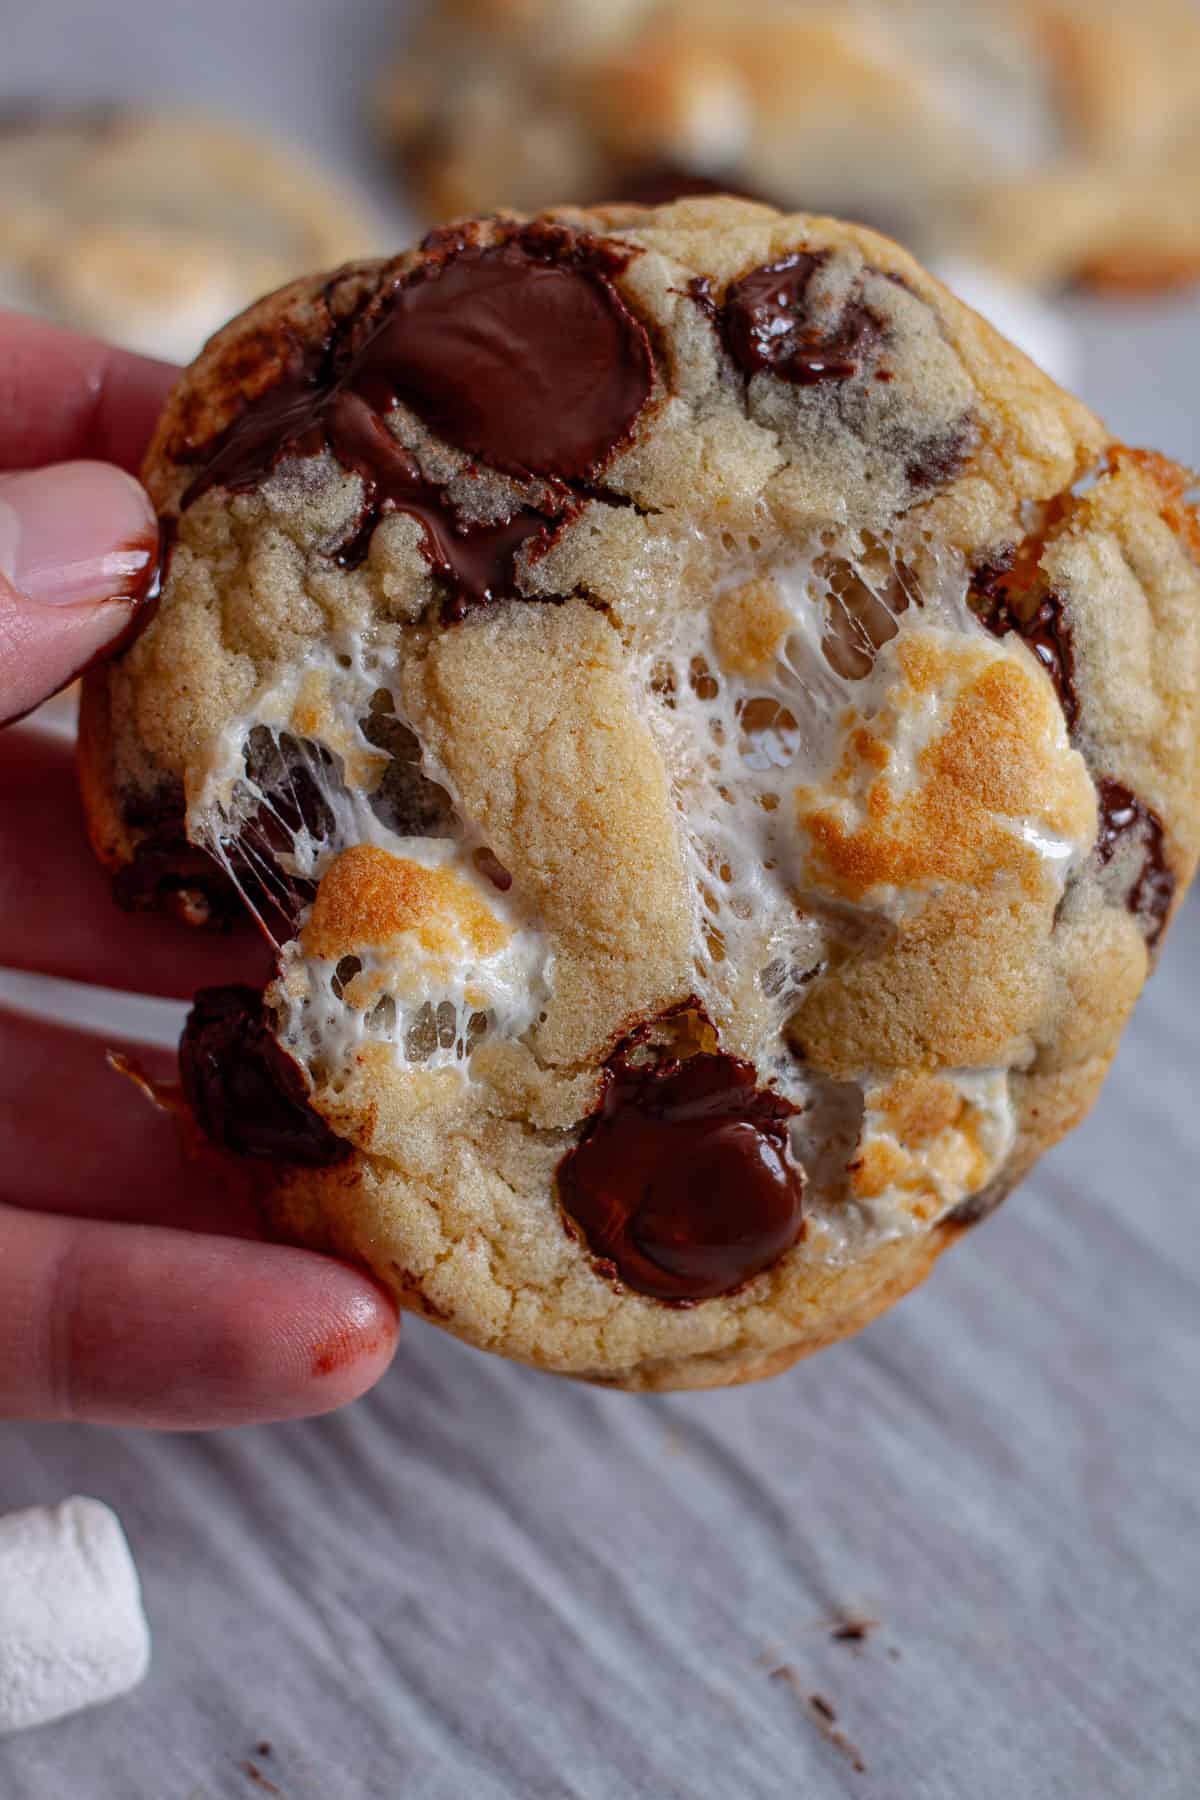 A close-up of a gooey marshmallow chocolate chip cookies.